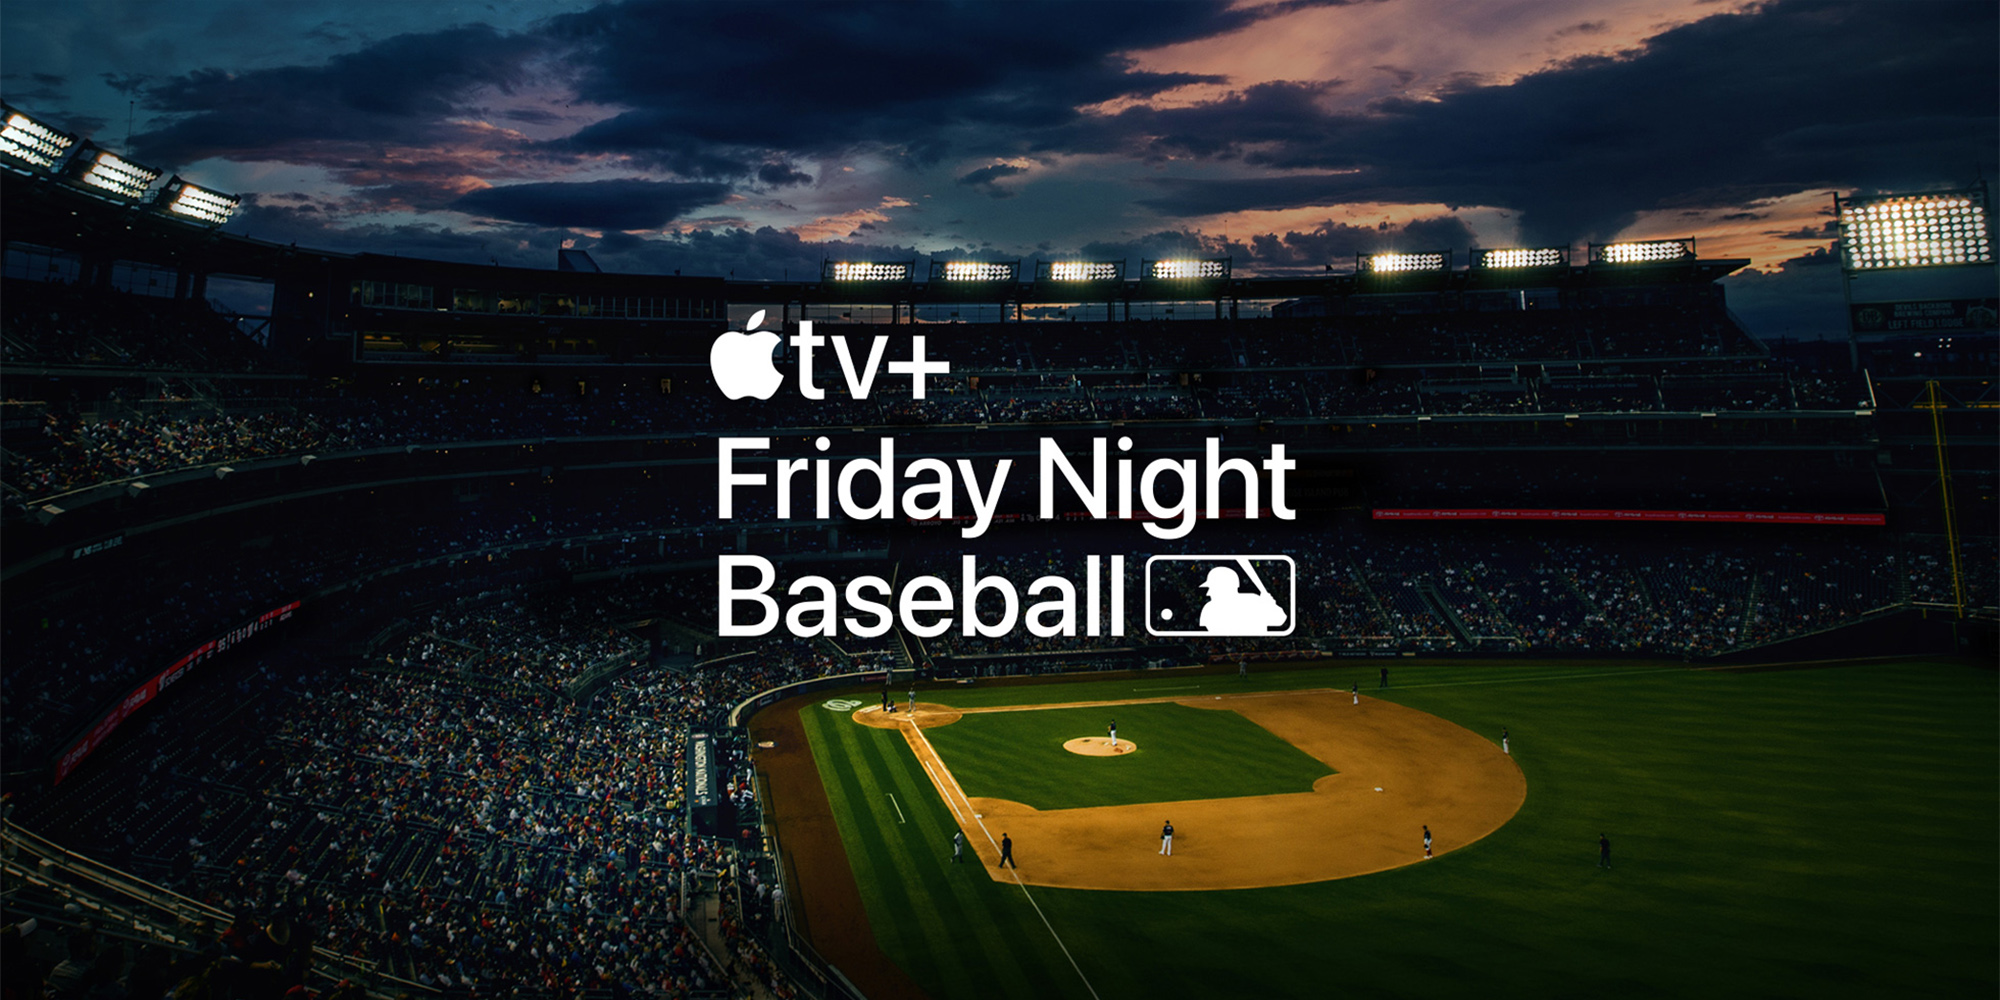 Apple expected to bid on Thursday Night Football streaming deal